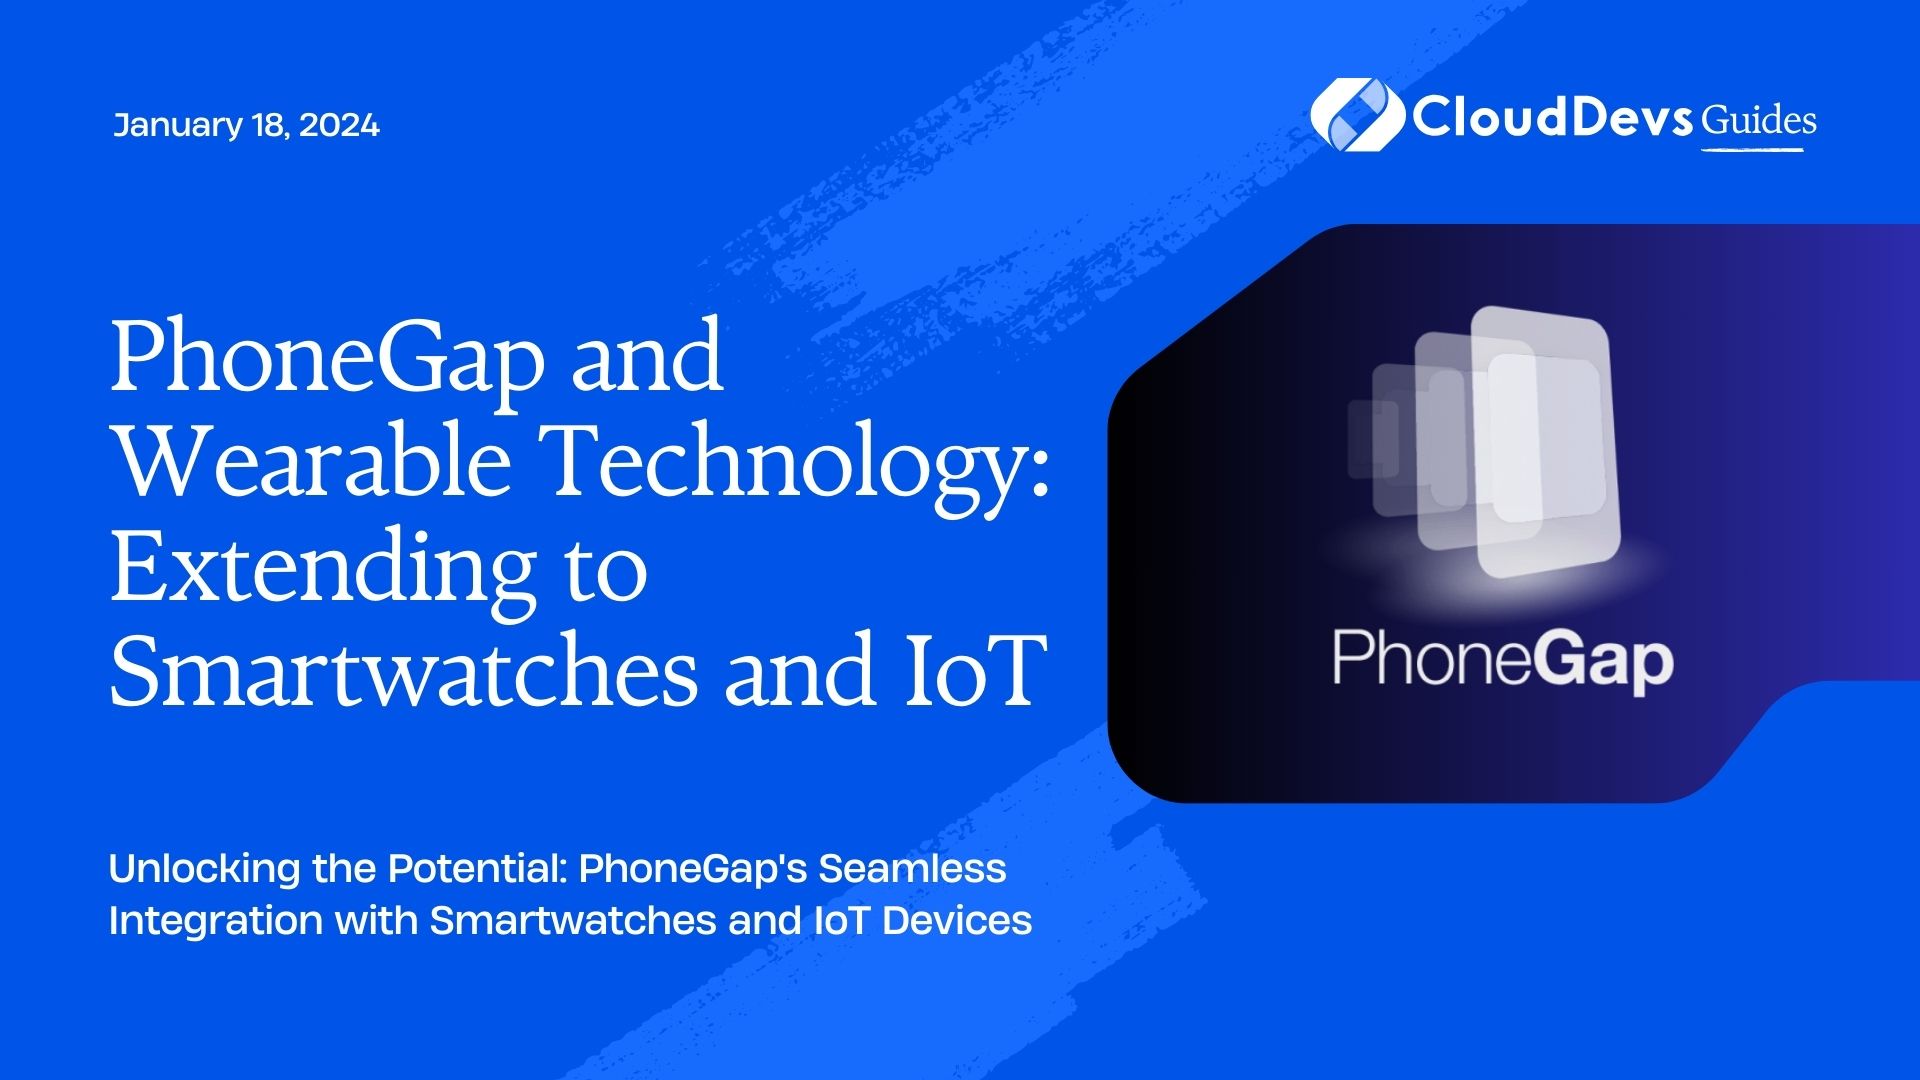 PhoneGap and Wearable Technology: Extending to Smartwatches and IoT